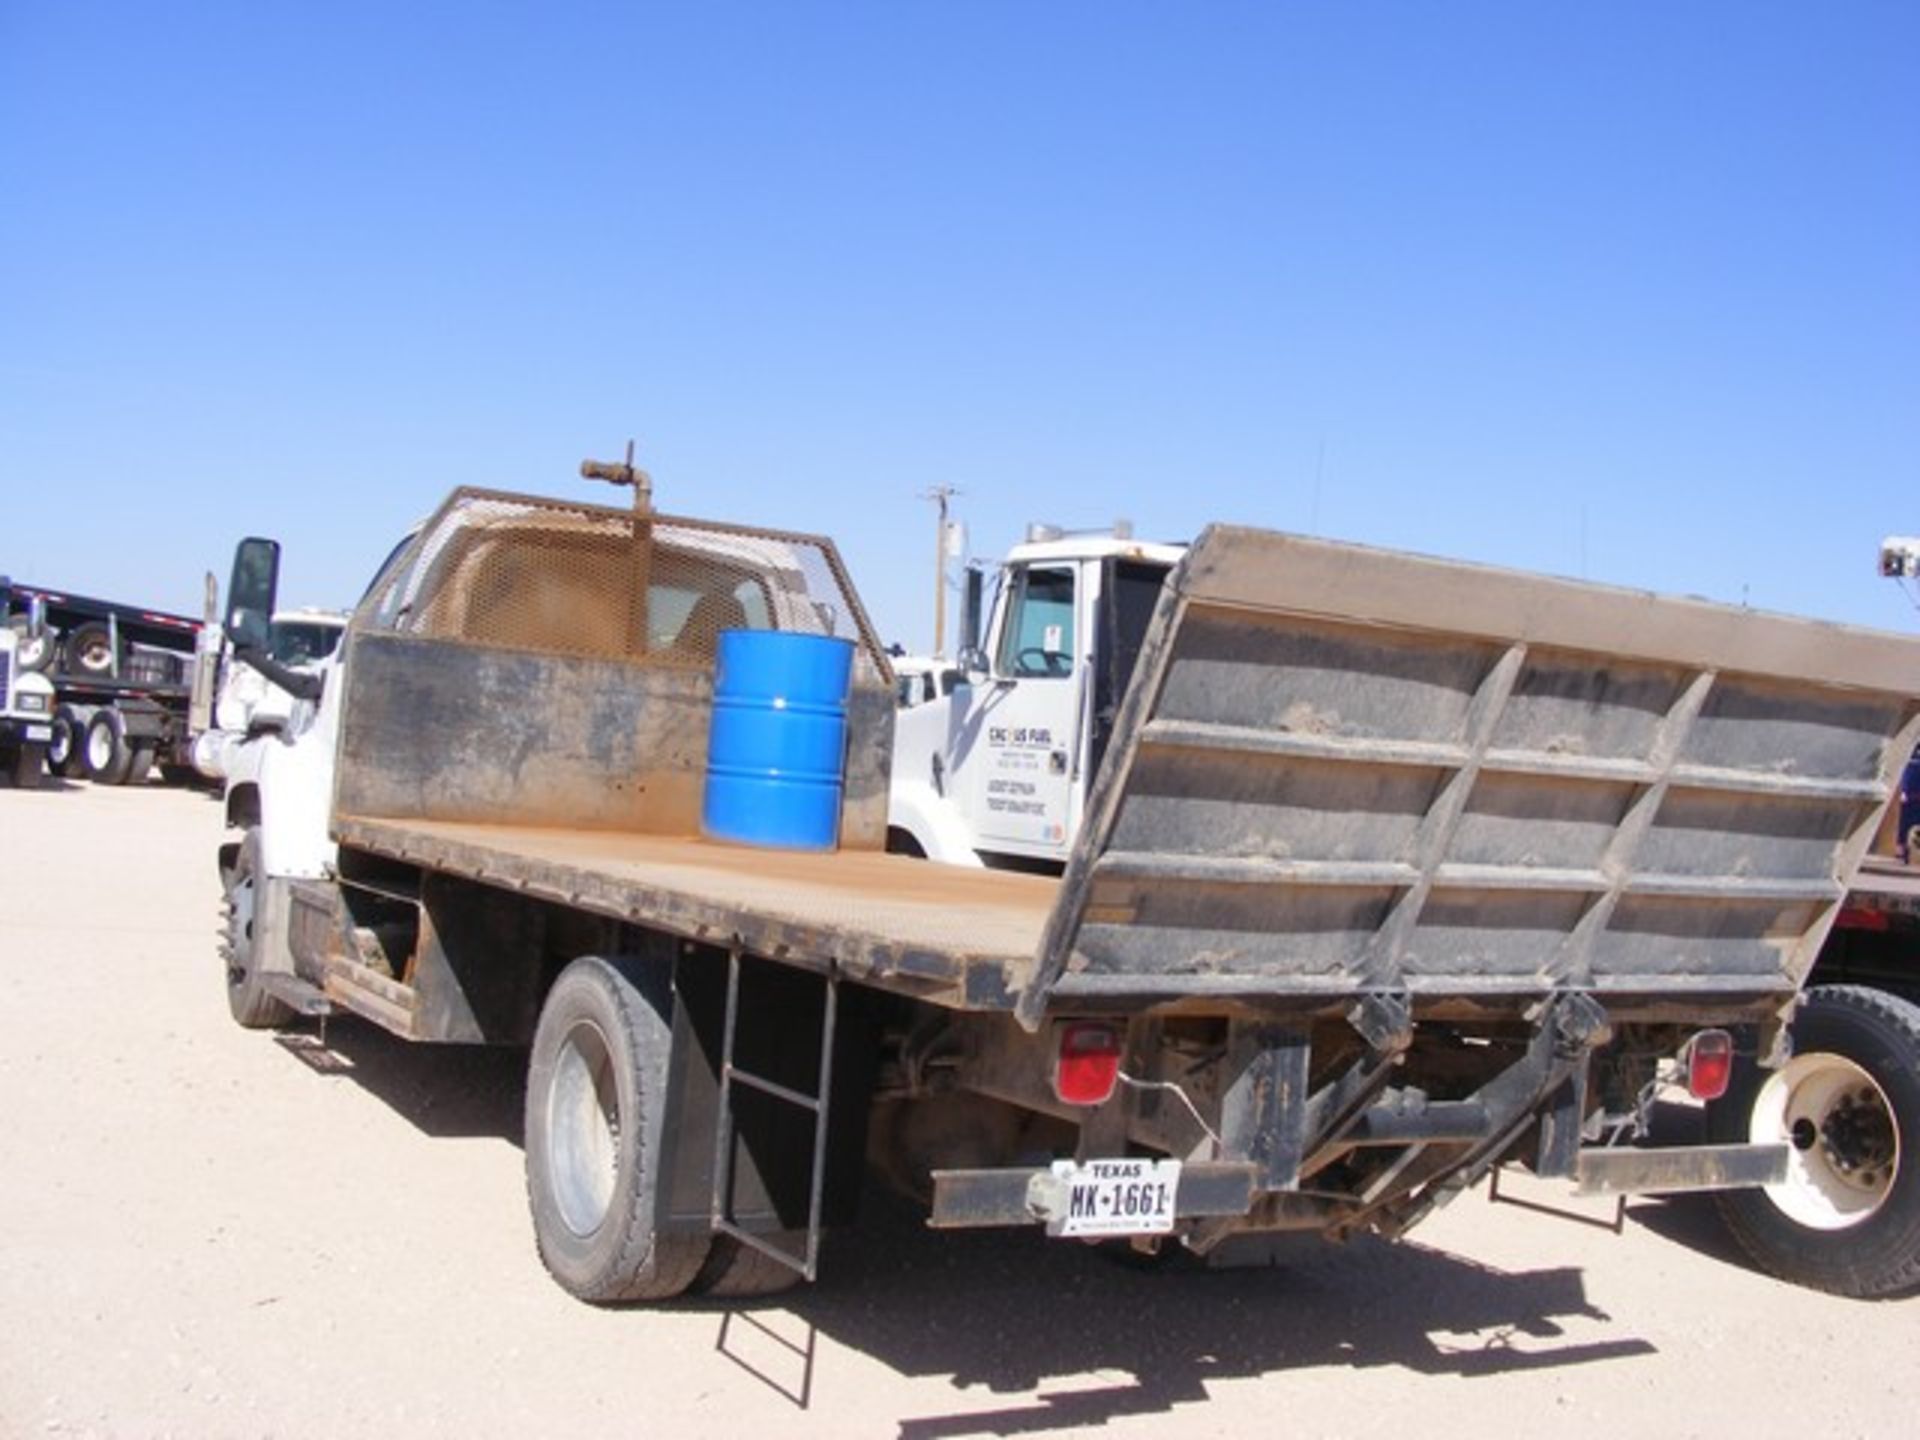 Located in YARD 1 - Midland, TX (2395) (X) 2006 CHEVROLET C7500 S/A DAY CAB STAKE BED TRUCK, VIN- - Image 5 of 10